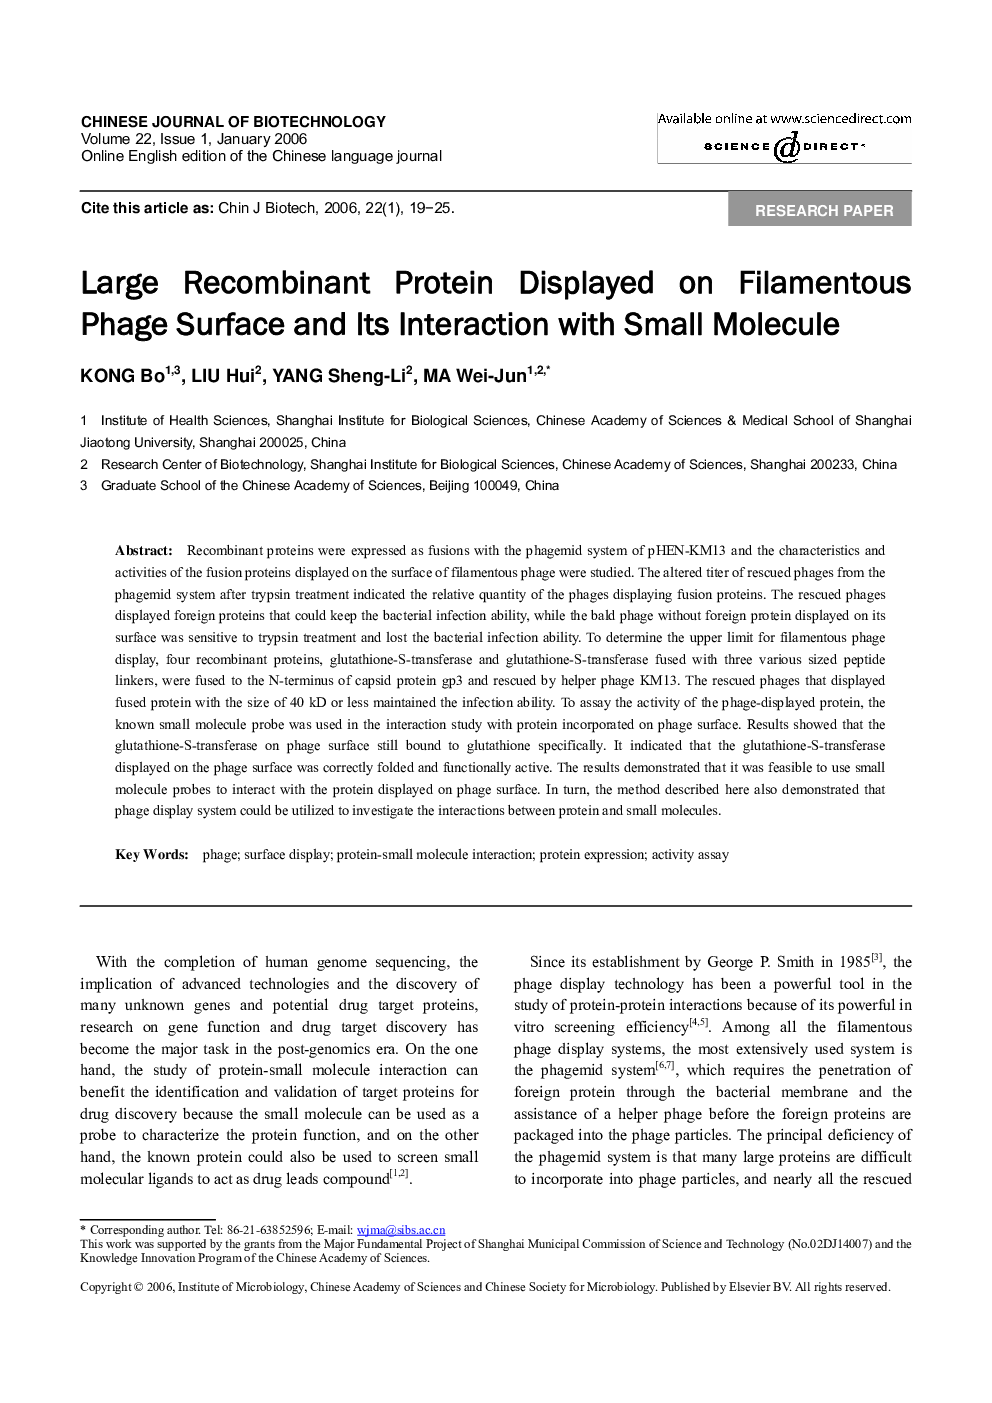 Large Recombinant Protein Displayed on Filamentous Phage Surface and Its Interaction with Small Molecule